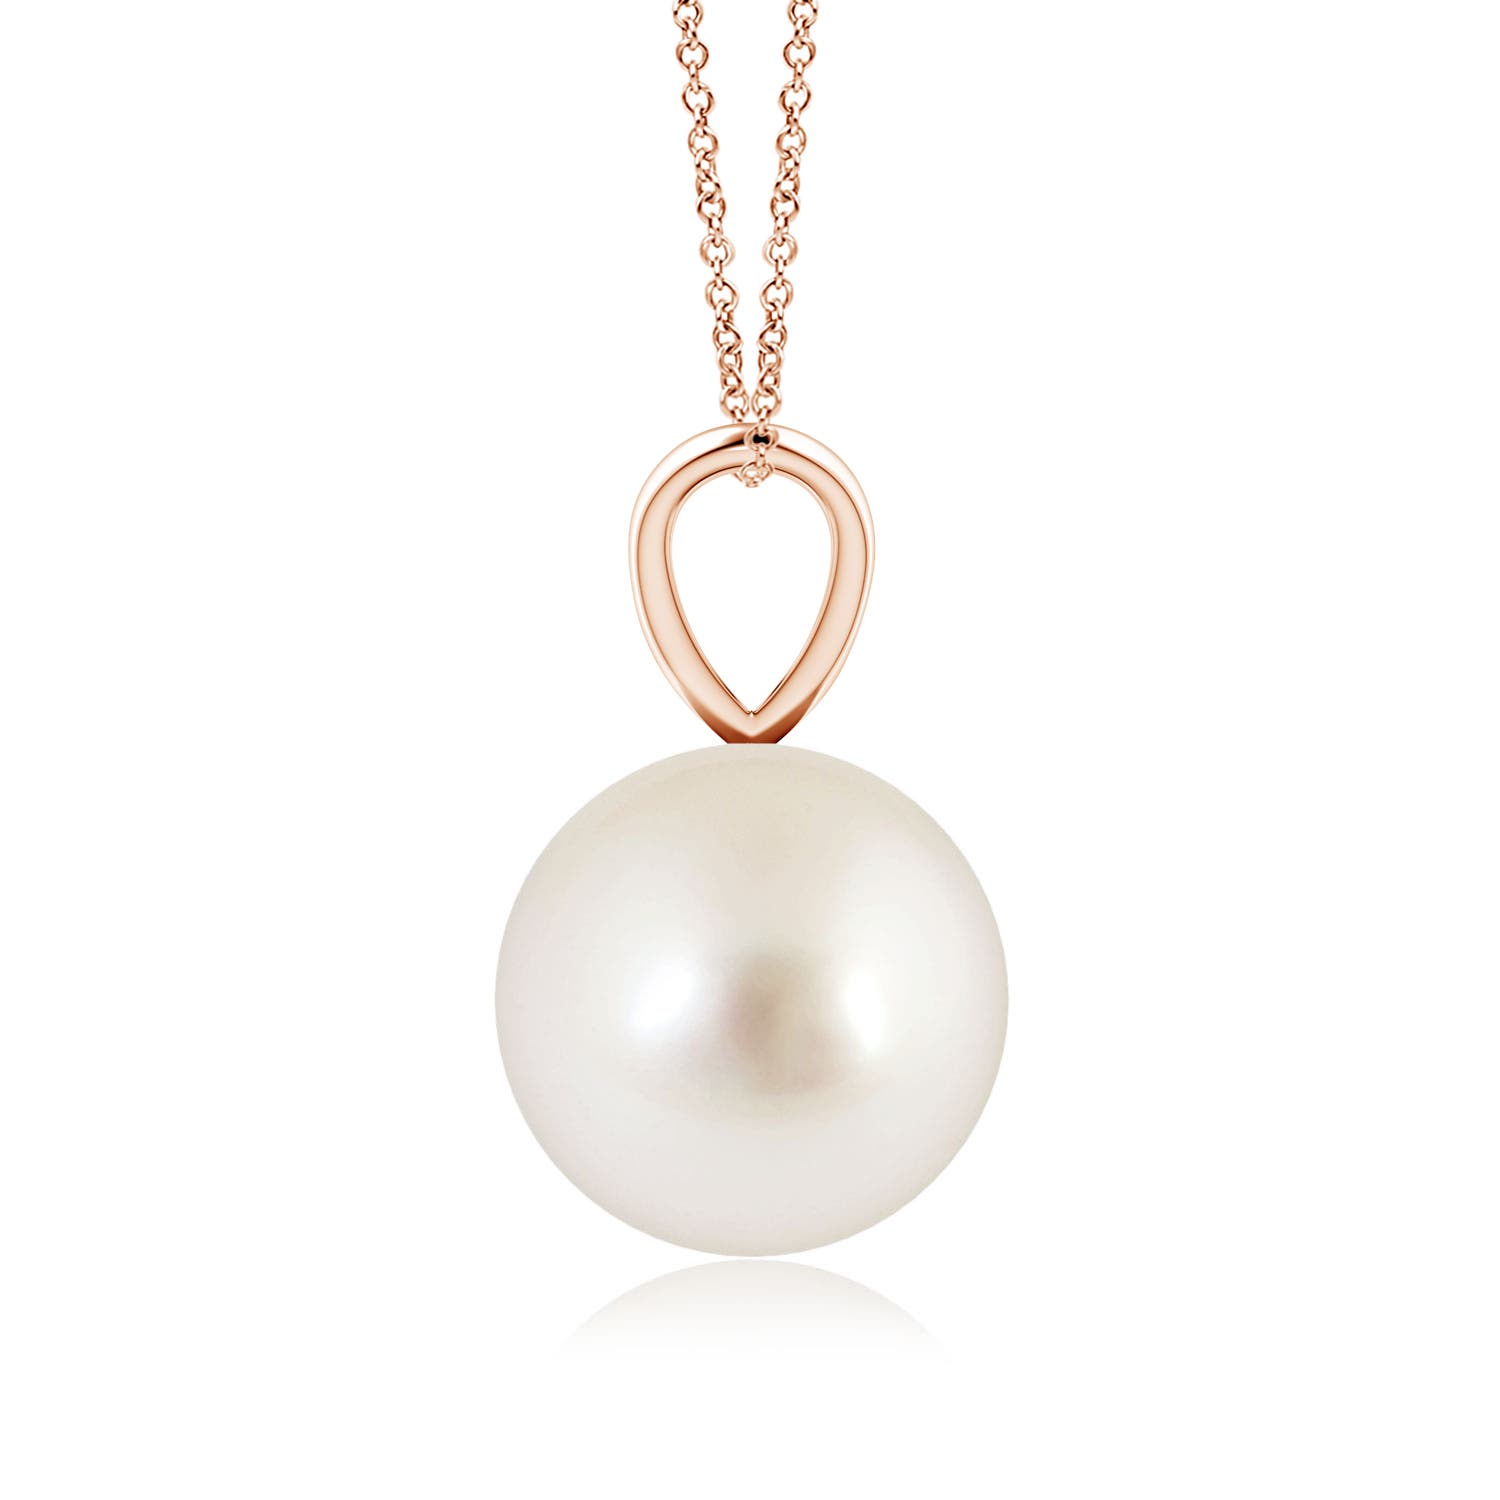 AAAA - South Sea Cultured Pearl / 5.25 CT / 14 KT Rose Gold